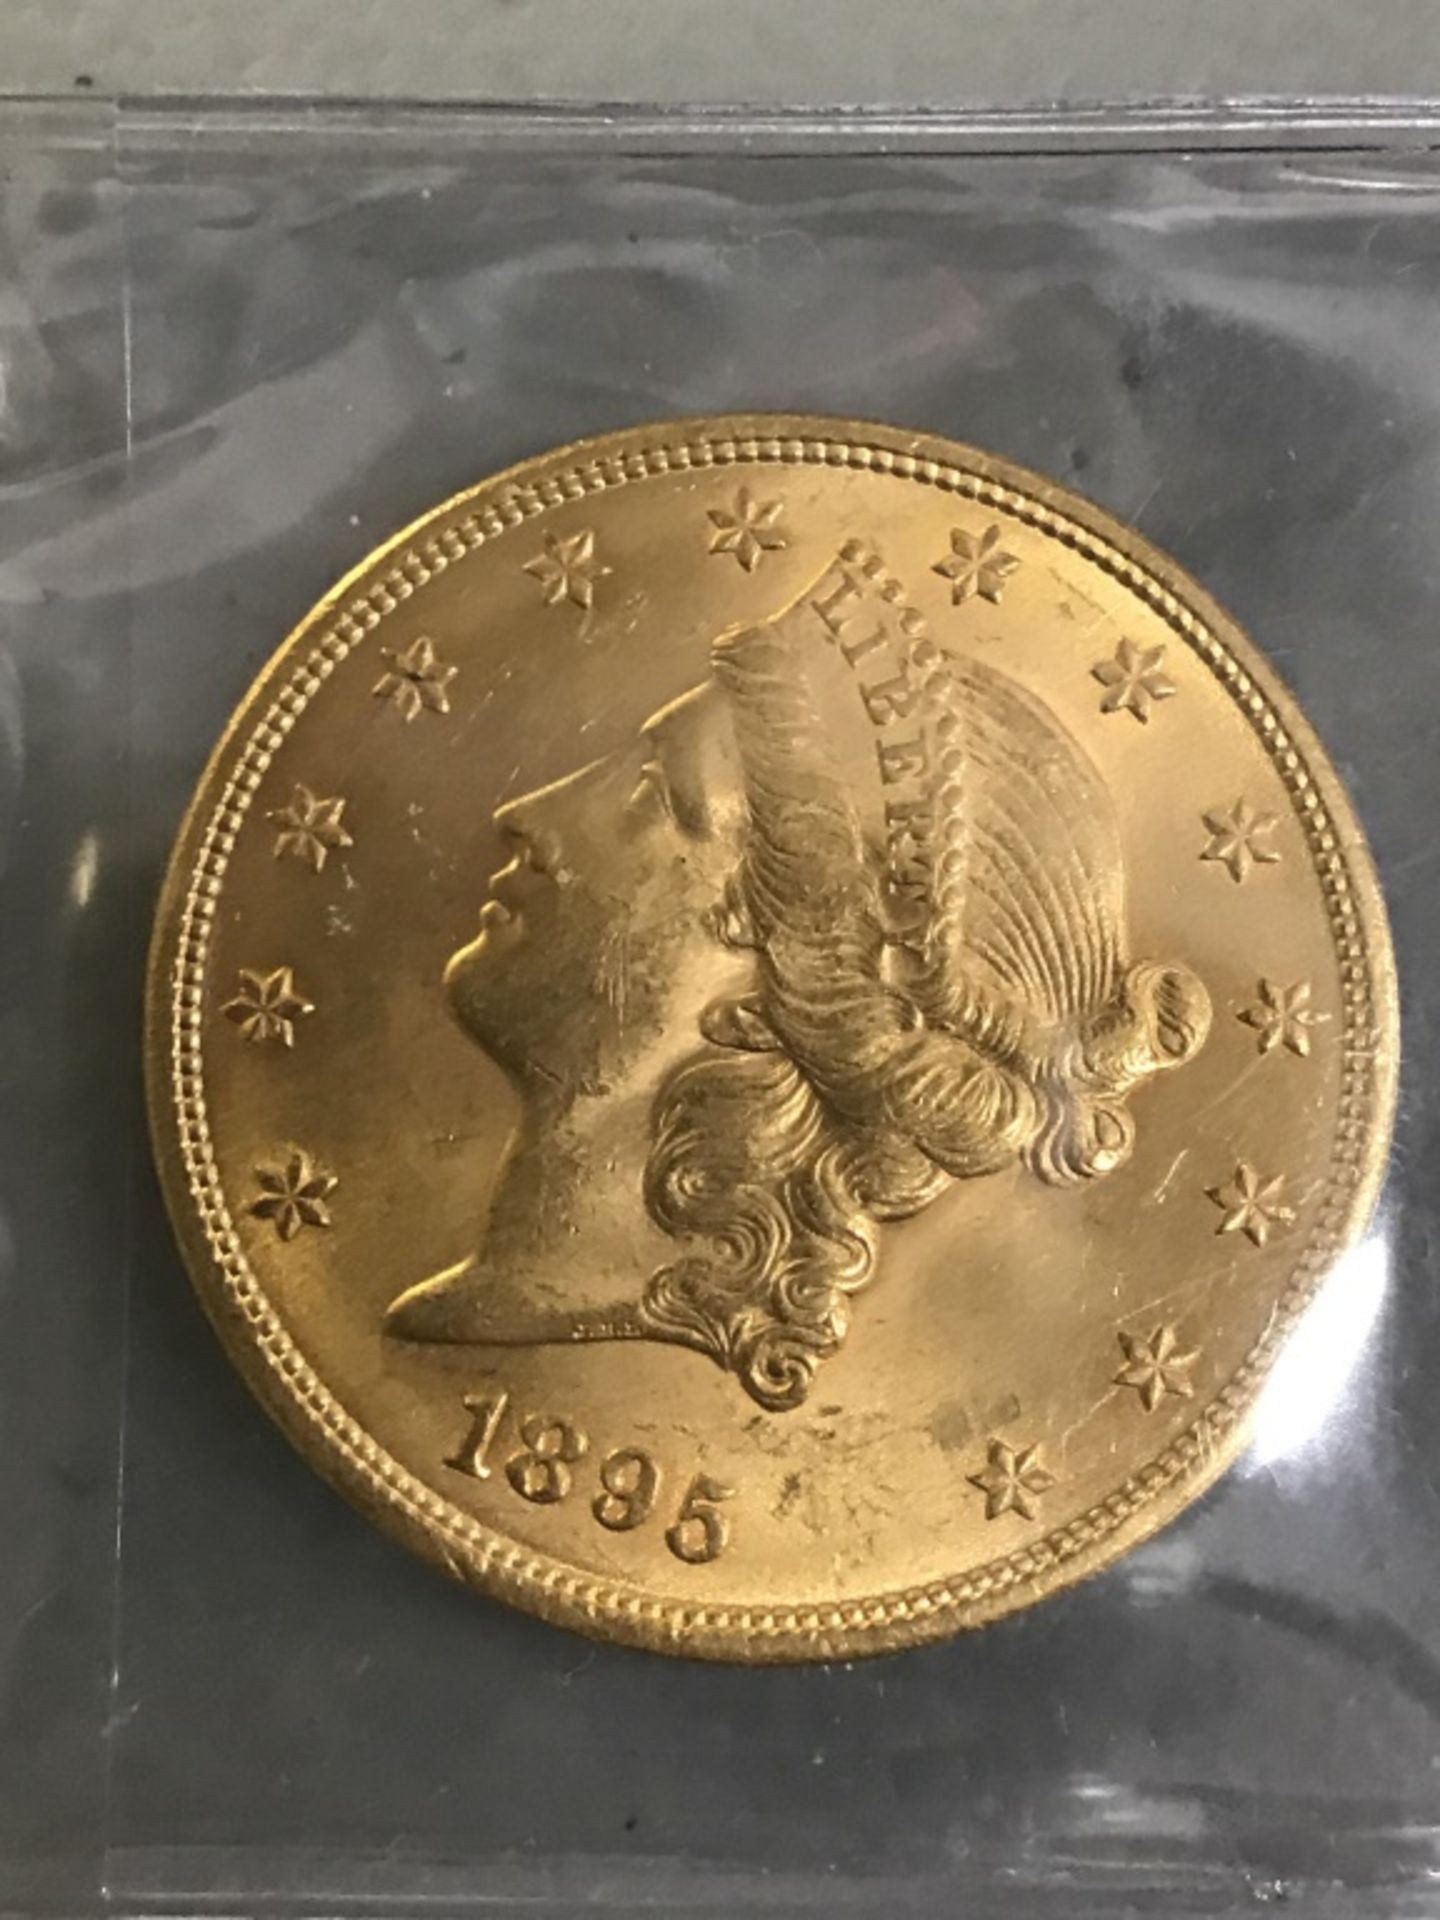 $20 US Gold 1895 Coin - Image 3 of 9